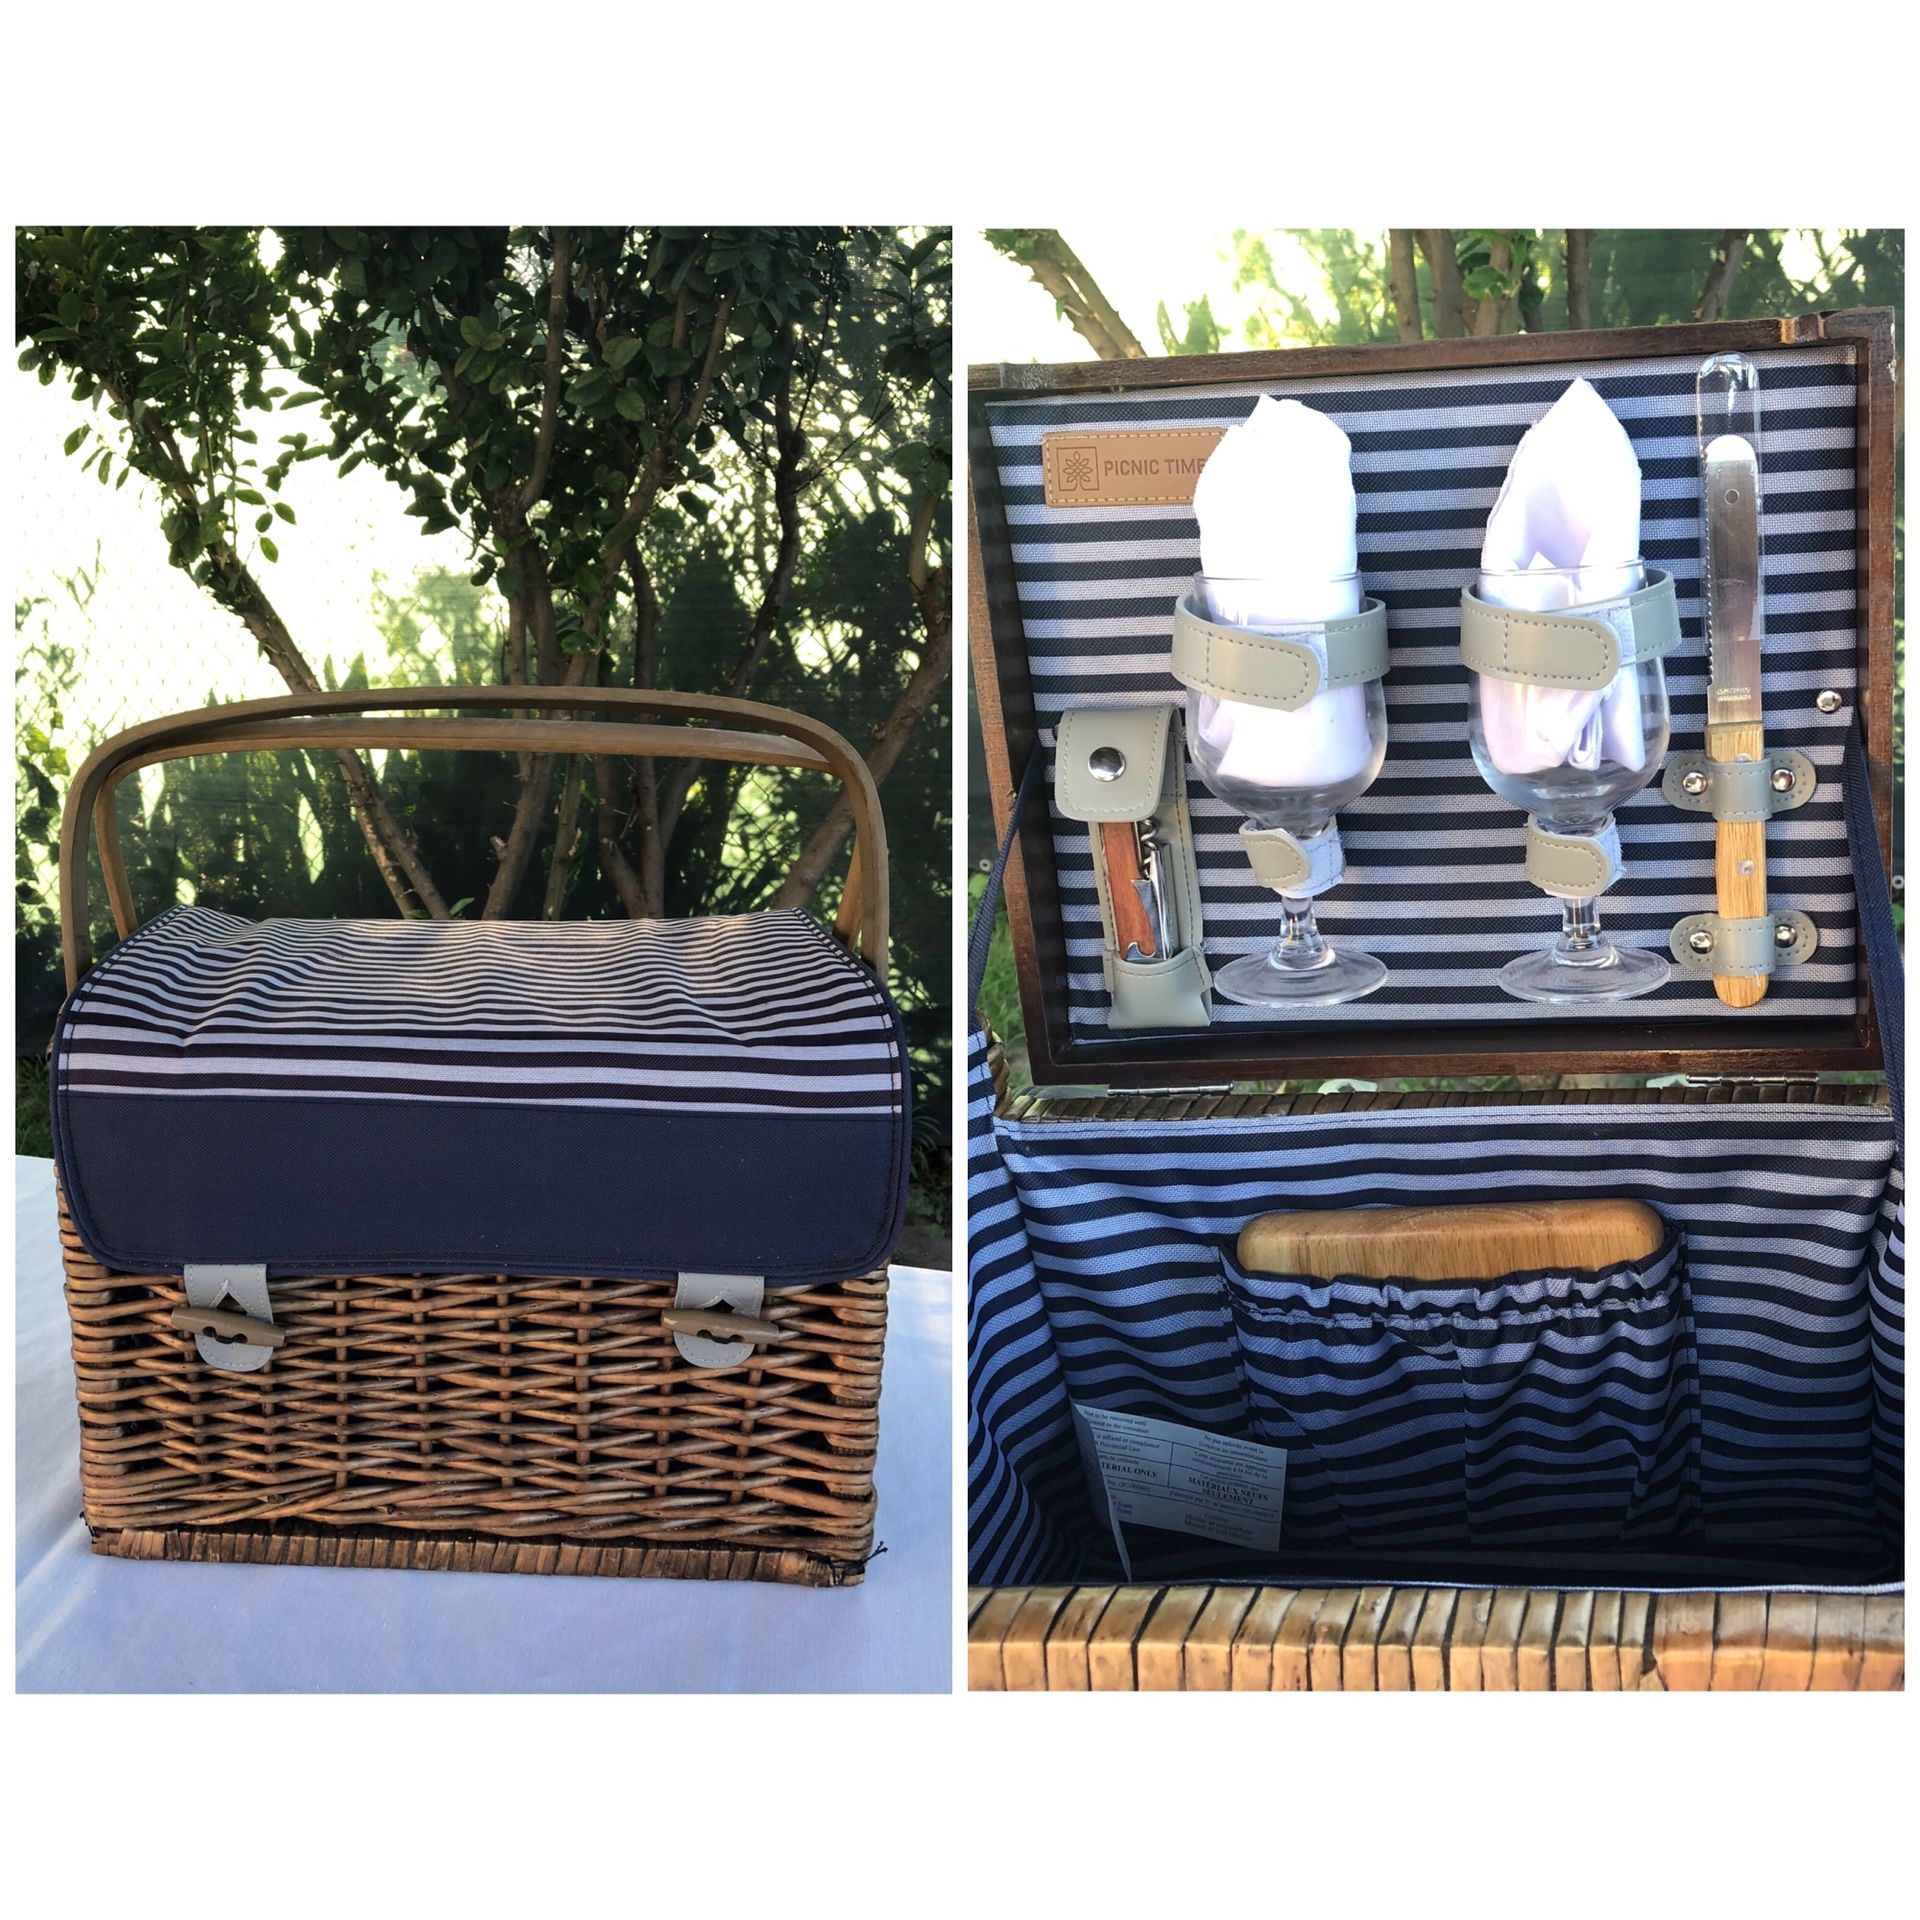 PICNIC BASKET FOR TWO